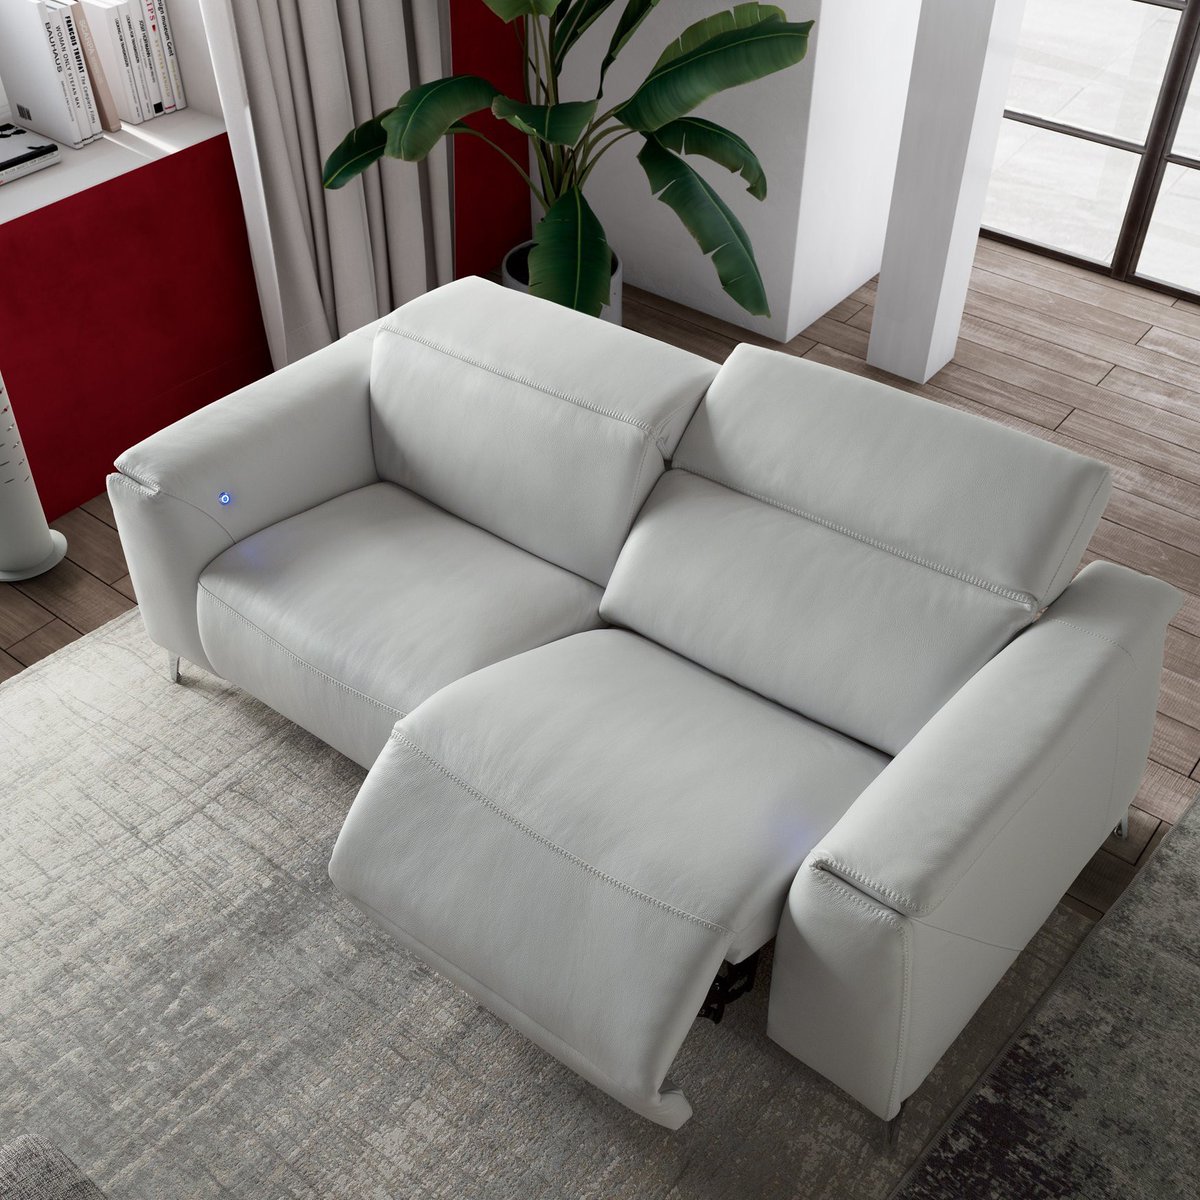 One of our latests jewels. 
Thanks to the Cubicomfort Triple-Motion Technology, Trionfo is the ultimate victory in made-to-measure comfort.
You really have to try it!
#AbsoluteComfort #NatuzziEditions #Natuzzi #sofa #design #furniture #homedecor #designer #preston #italiansofas